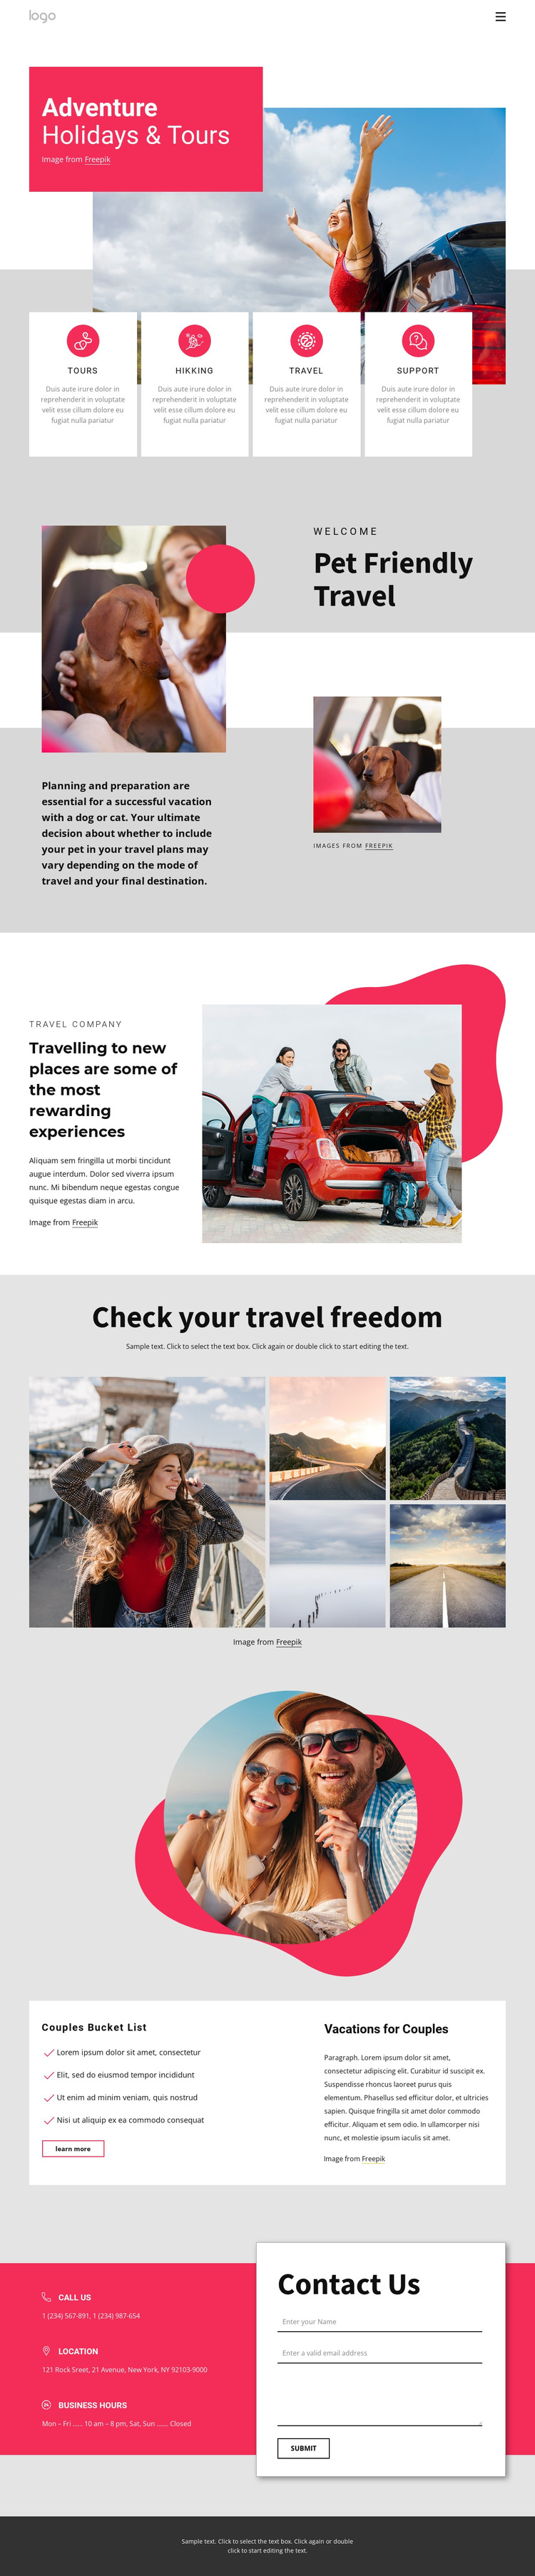 Adventure holidays and tours HTML5 Template